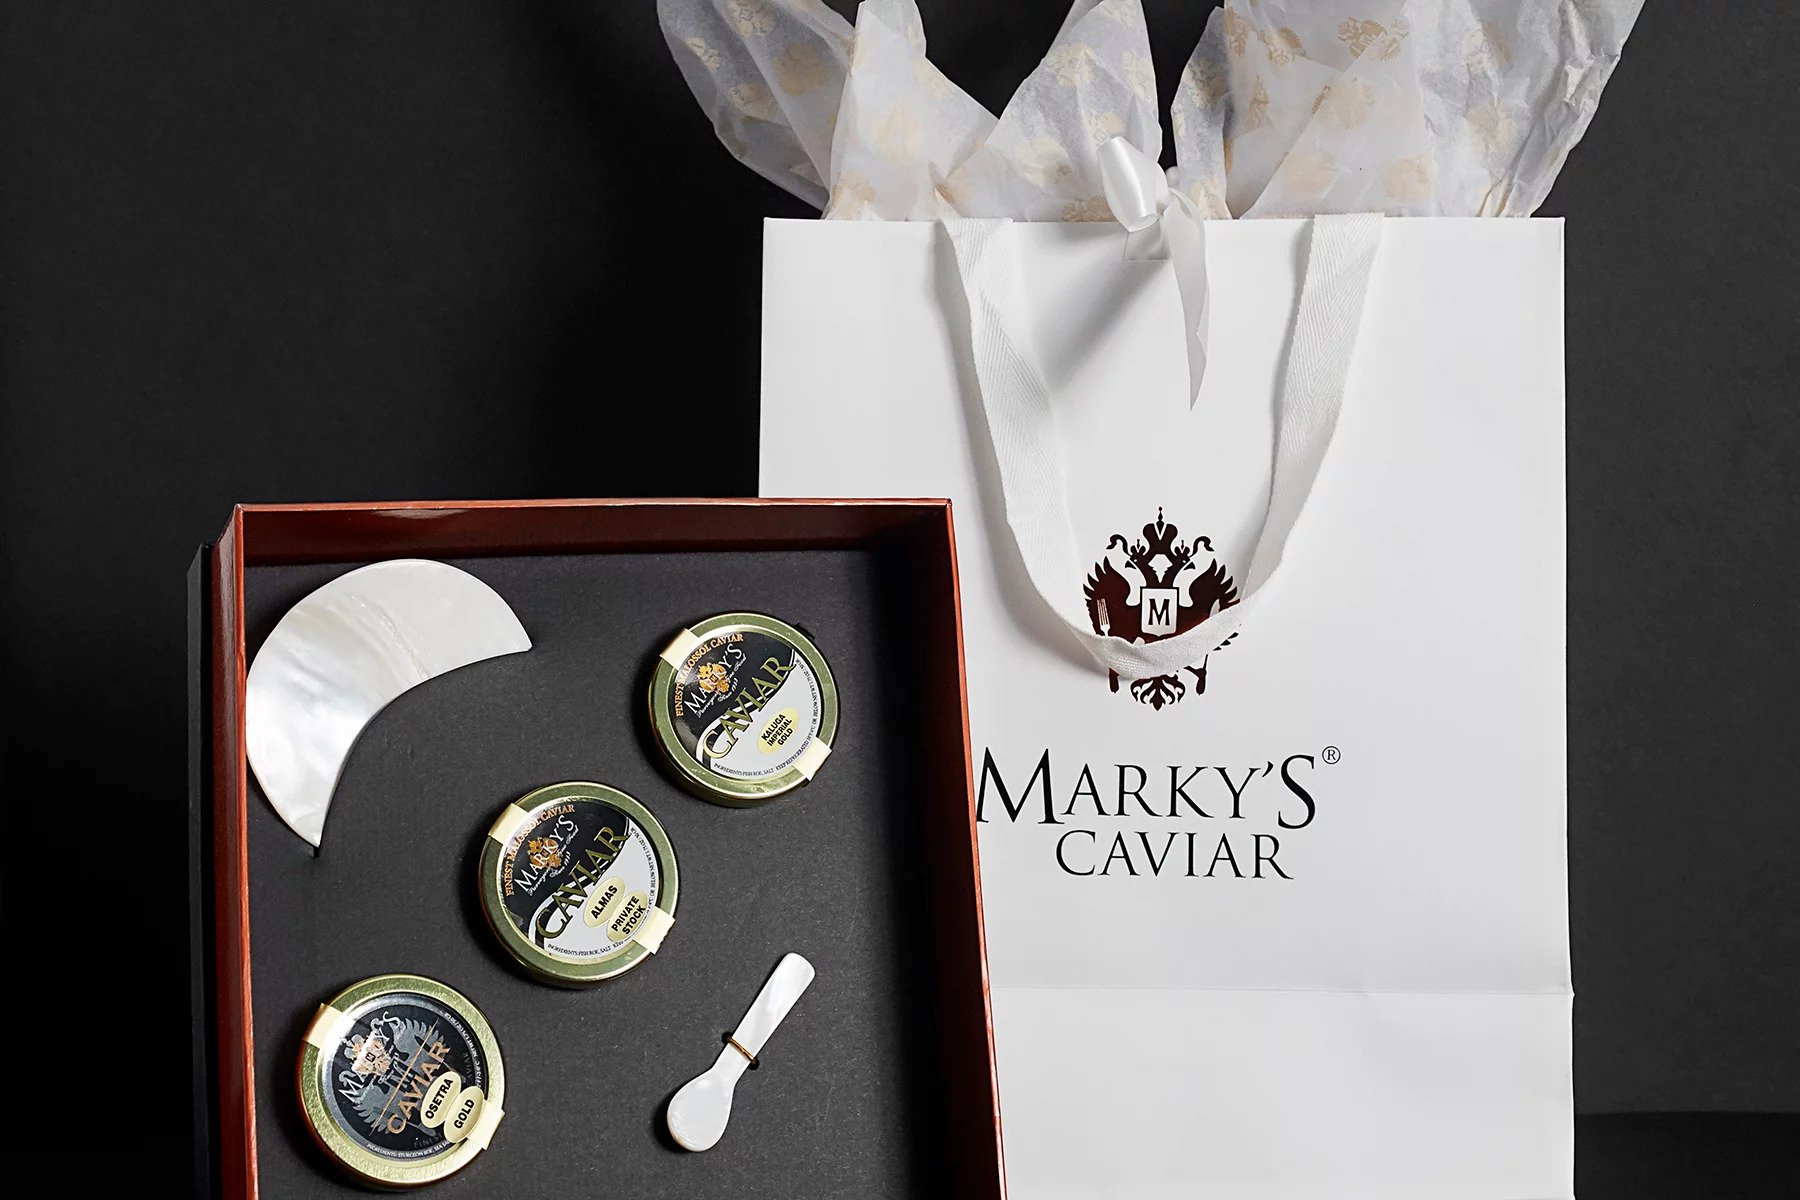 Travel+Leisure: The Best Places to Buy Caviar Online